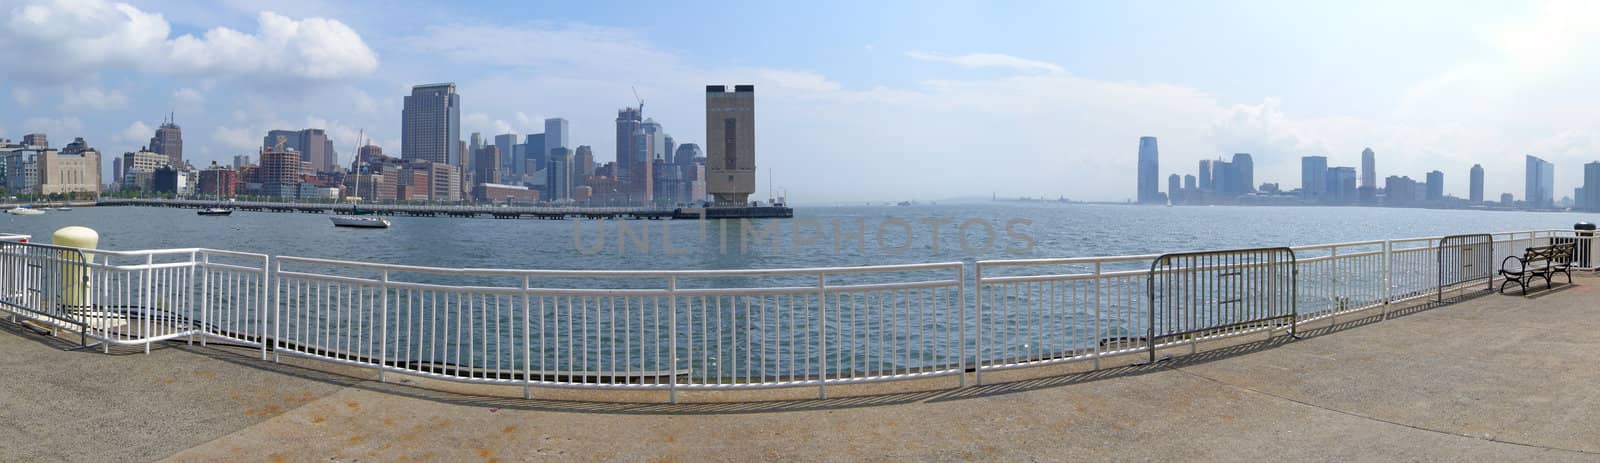 manhattan panorama, holland tunnel ventilation in the middle, jersey city in distance